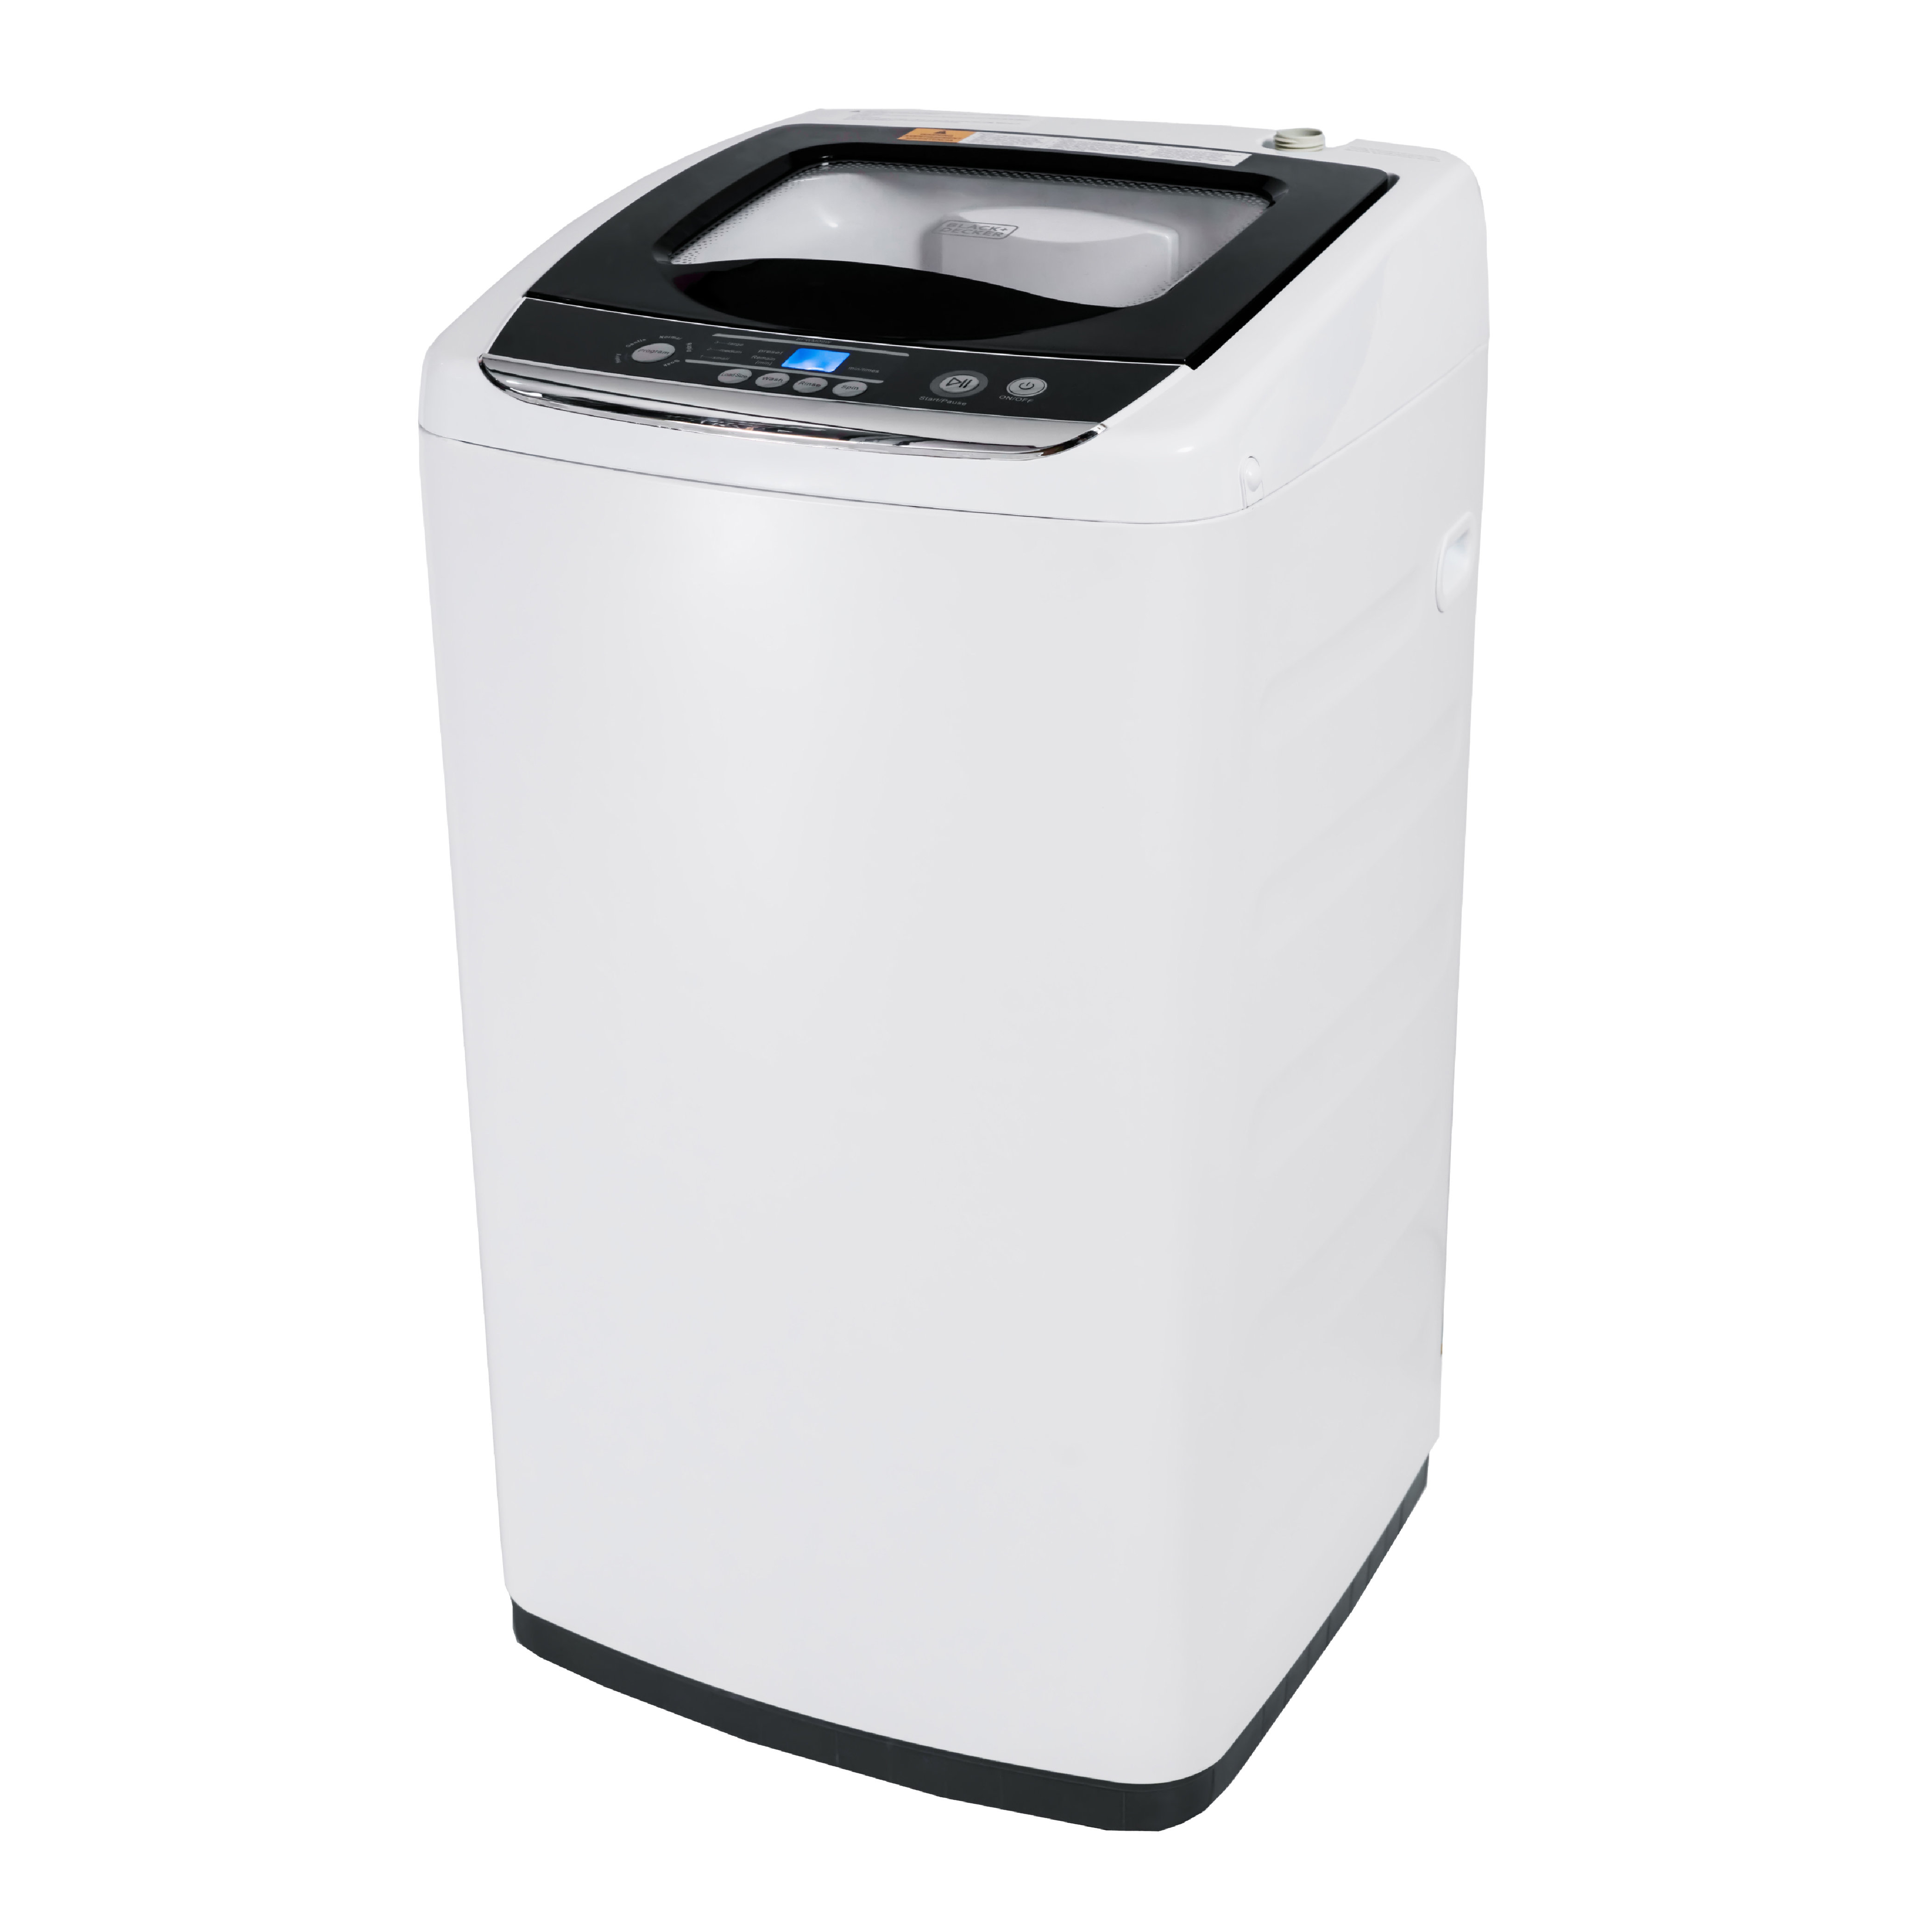 Black + Decker BLACK+DECKER Small Portable Washer, Washing Machine for  Household Use, 0.9 Cu. Ft. with 5 Cycles, Transparent Lid & LED Display &  Reviews